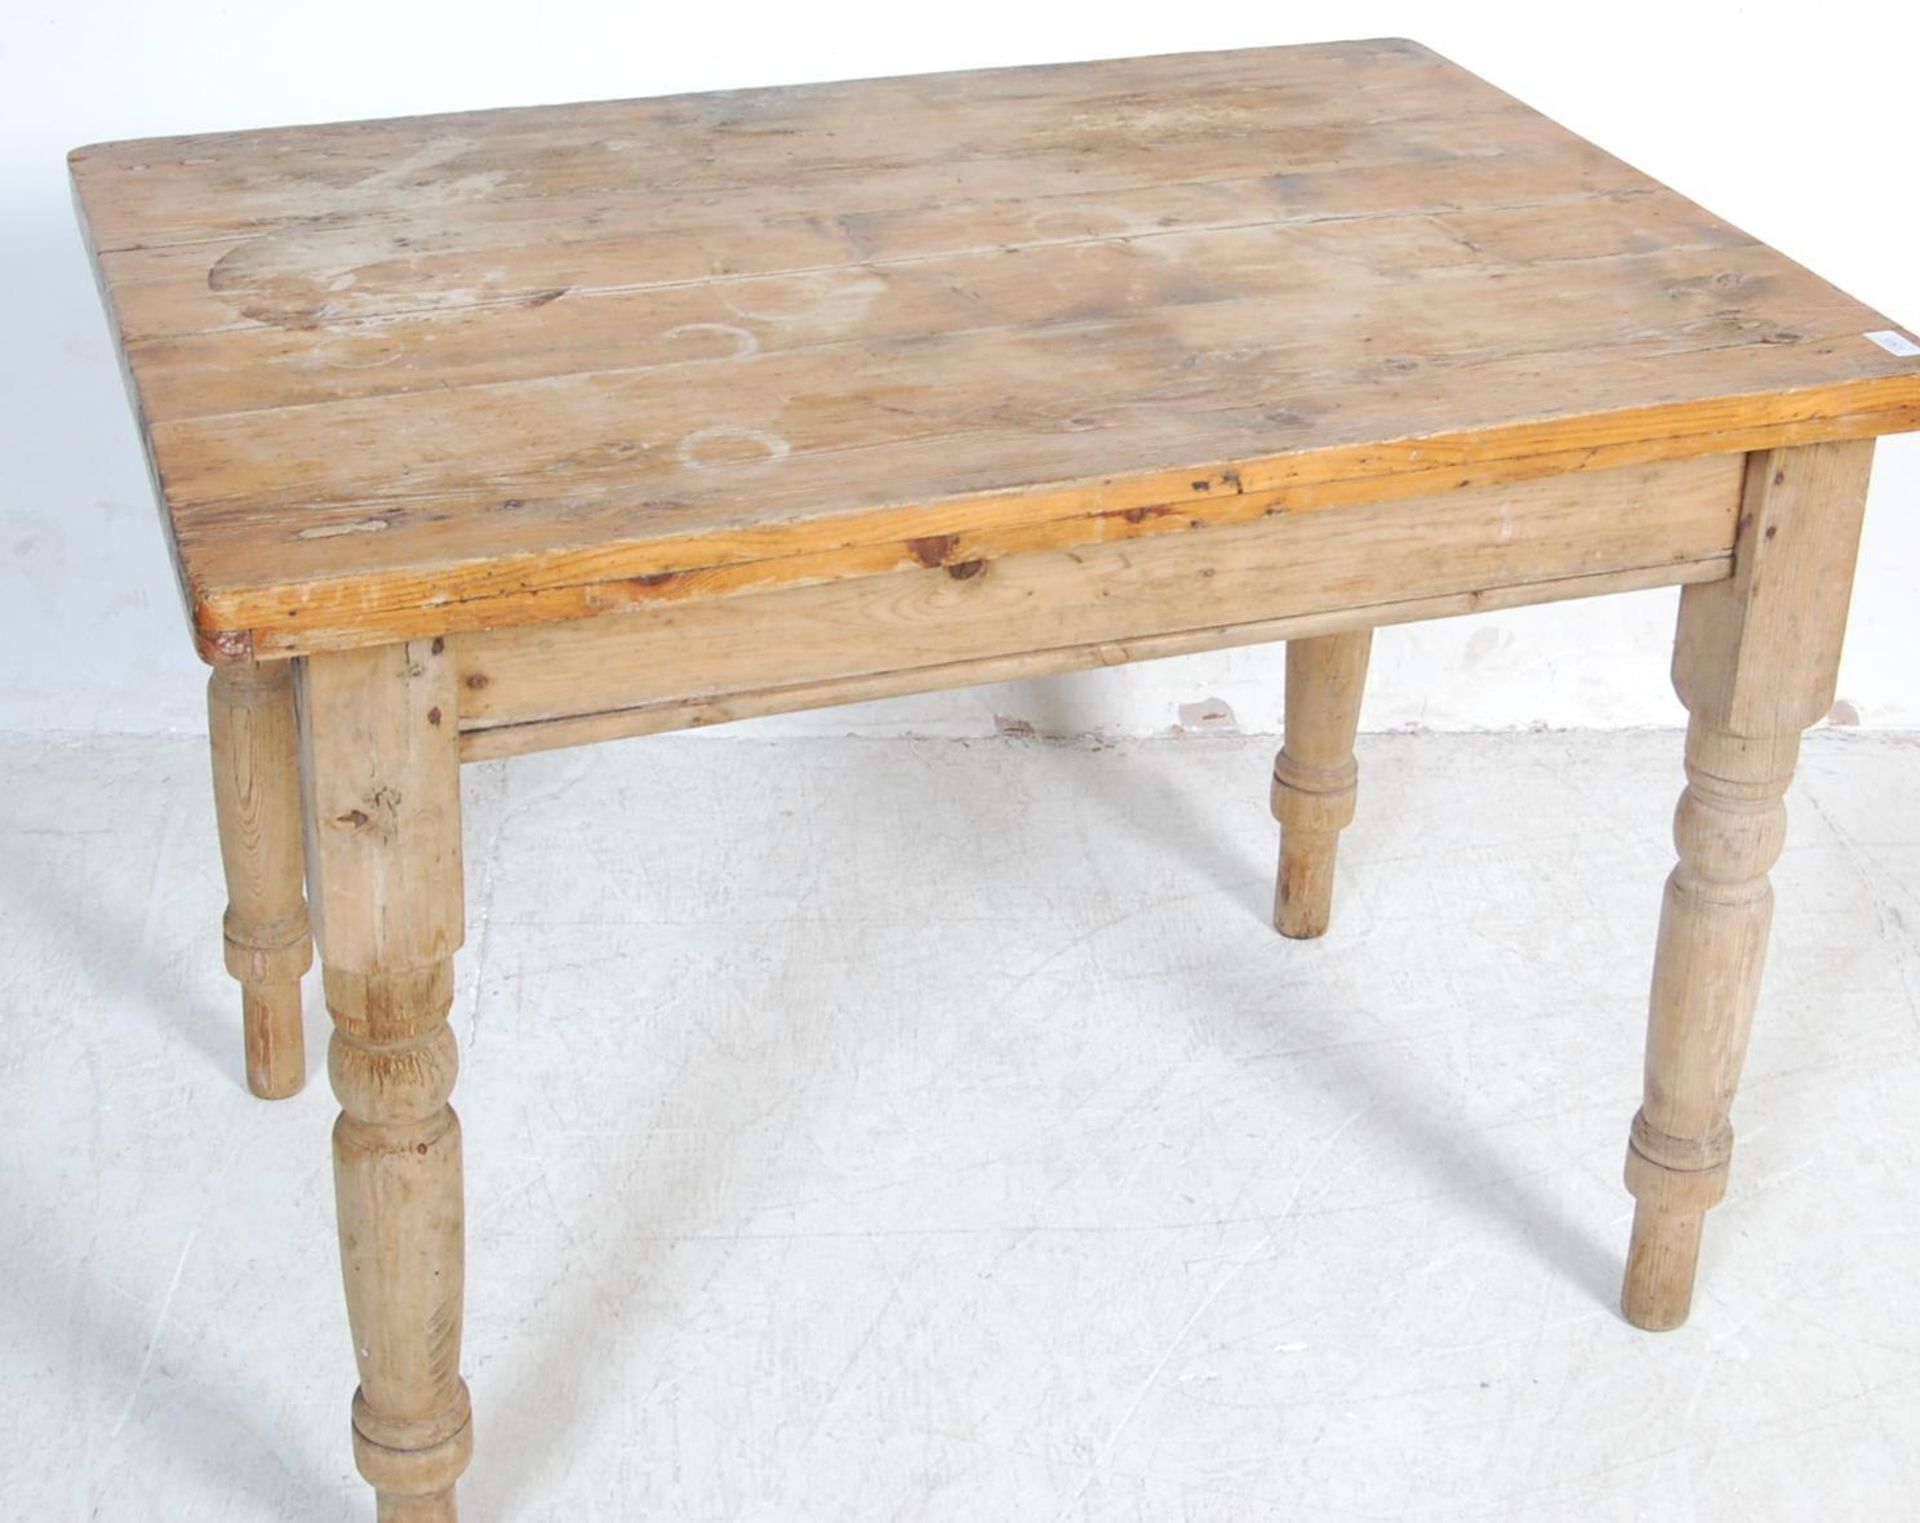 VICTORIAN 19TH CENTURY COUNTRY PINE DINING TABLE - Image 2 of 5